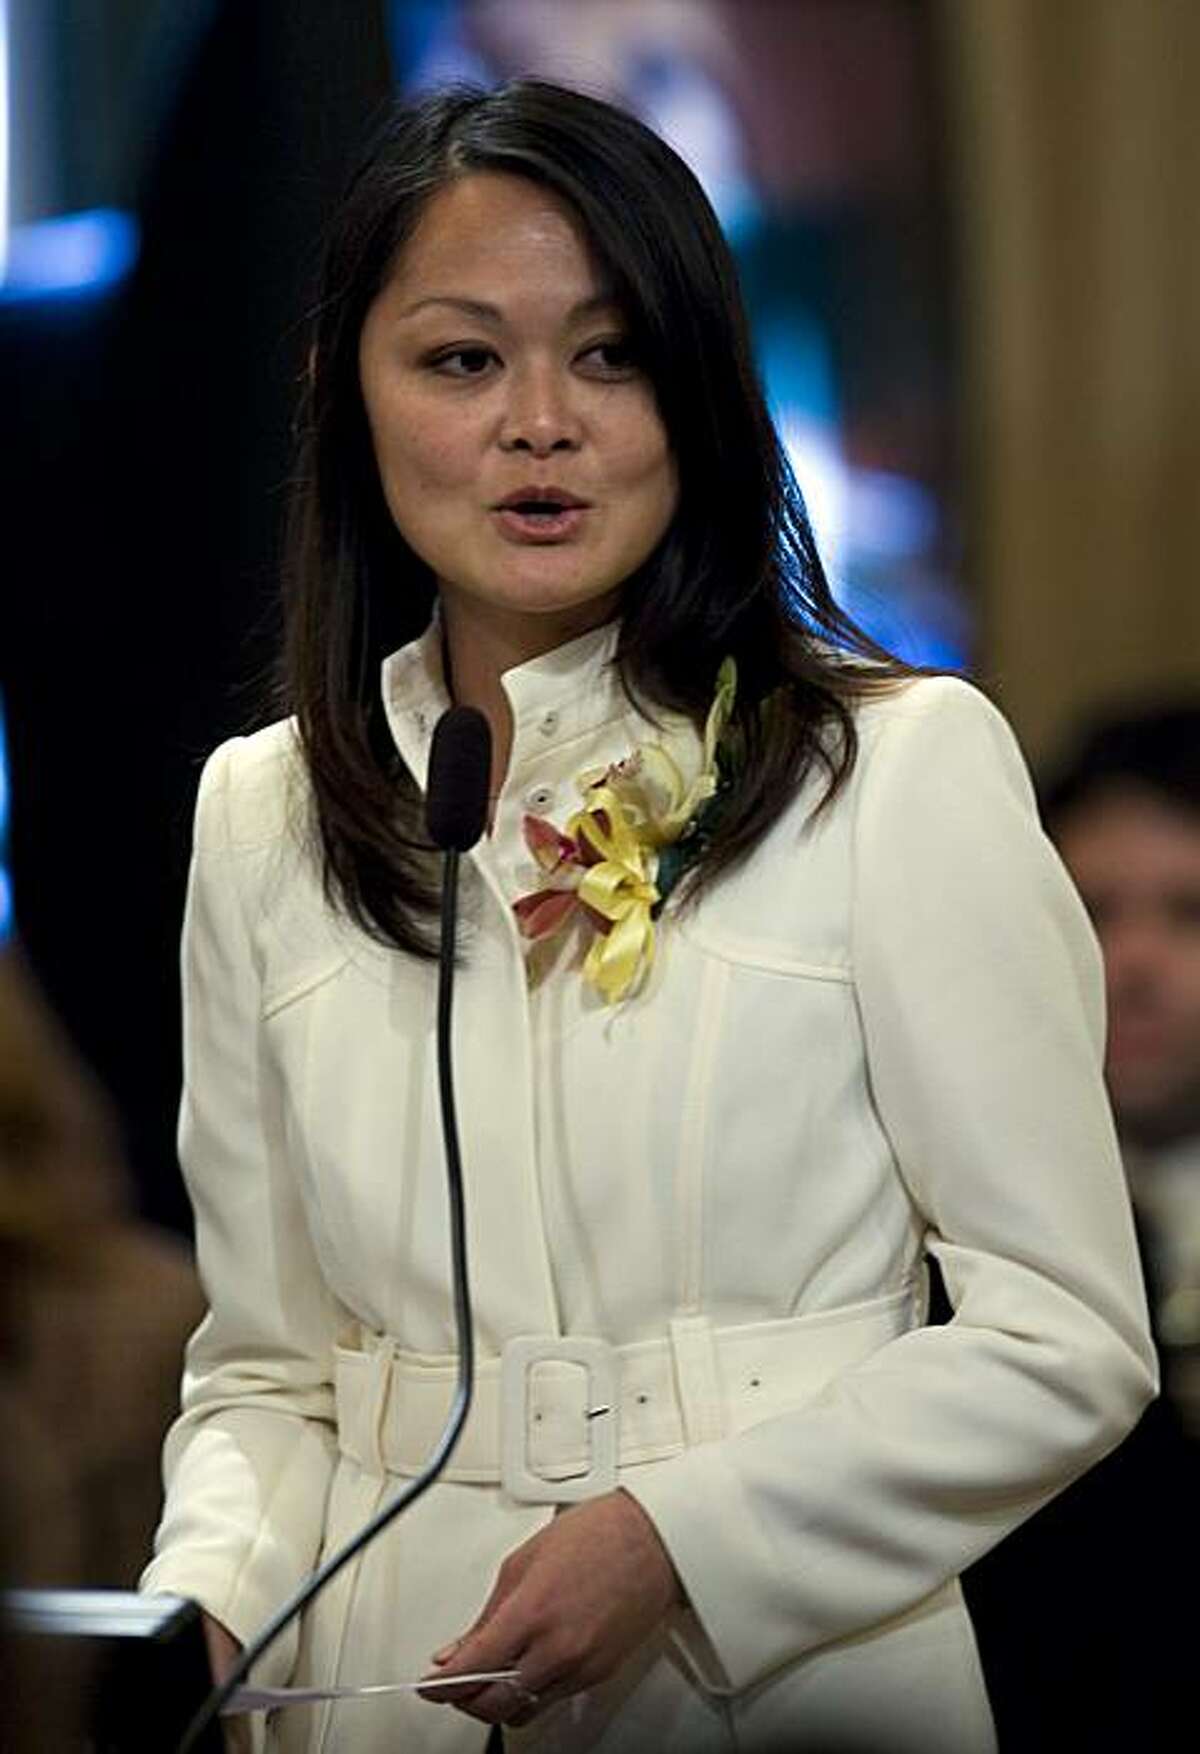 Supervisor Carmen Chu speaks during the inauguration of the San Francisco Board of Supervisors in the board's San Francisco, Calif., chambers on Thursday Jan. 8, 2009.